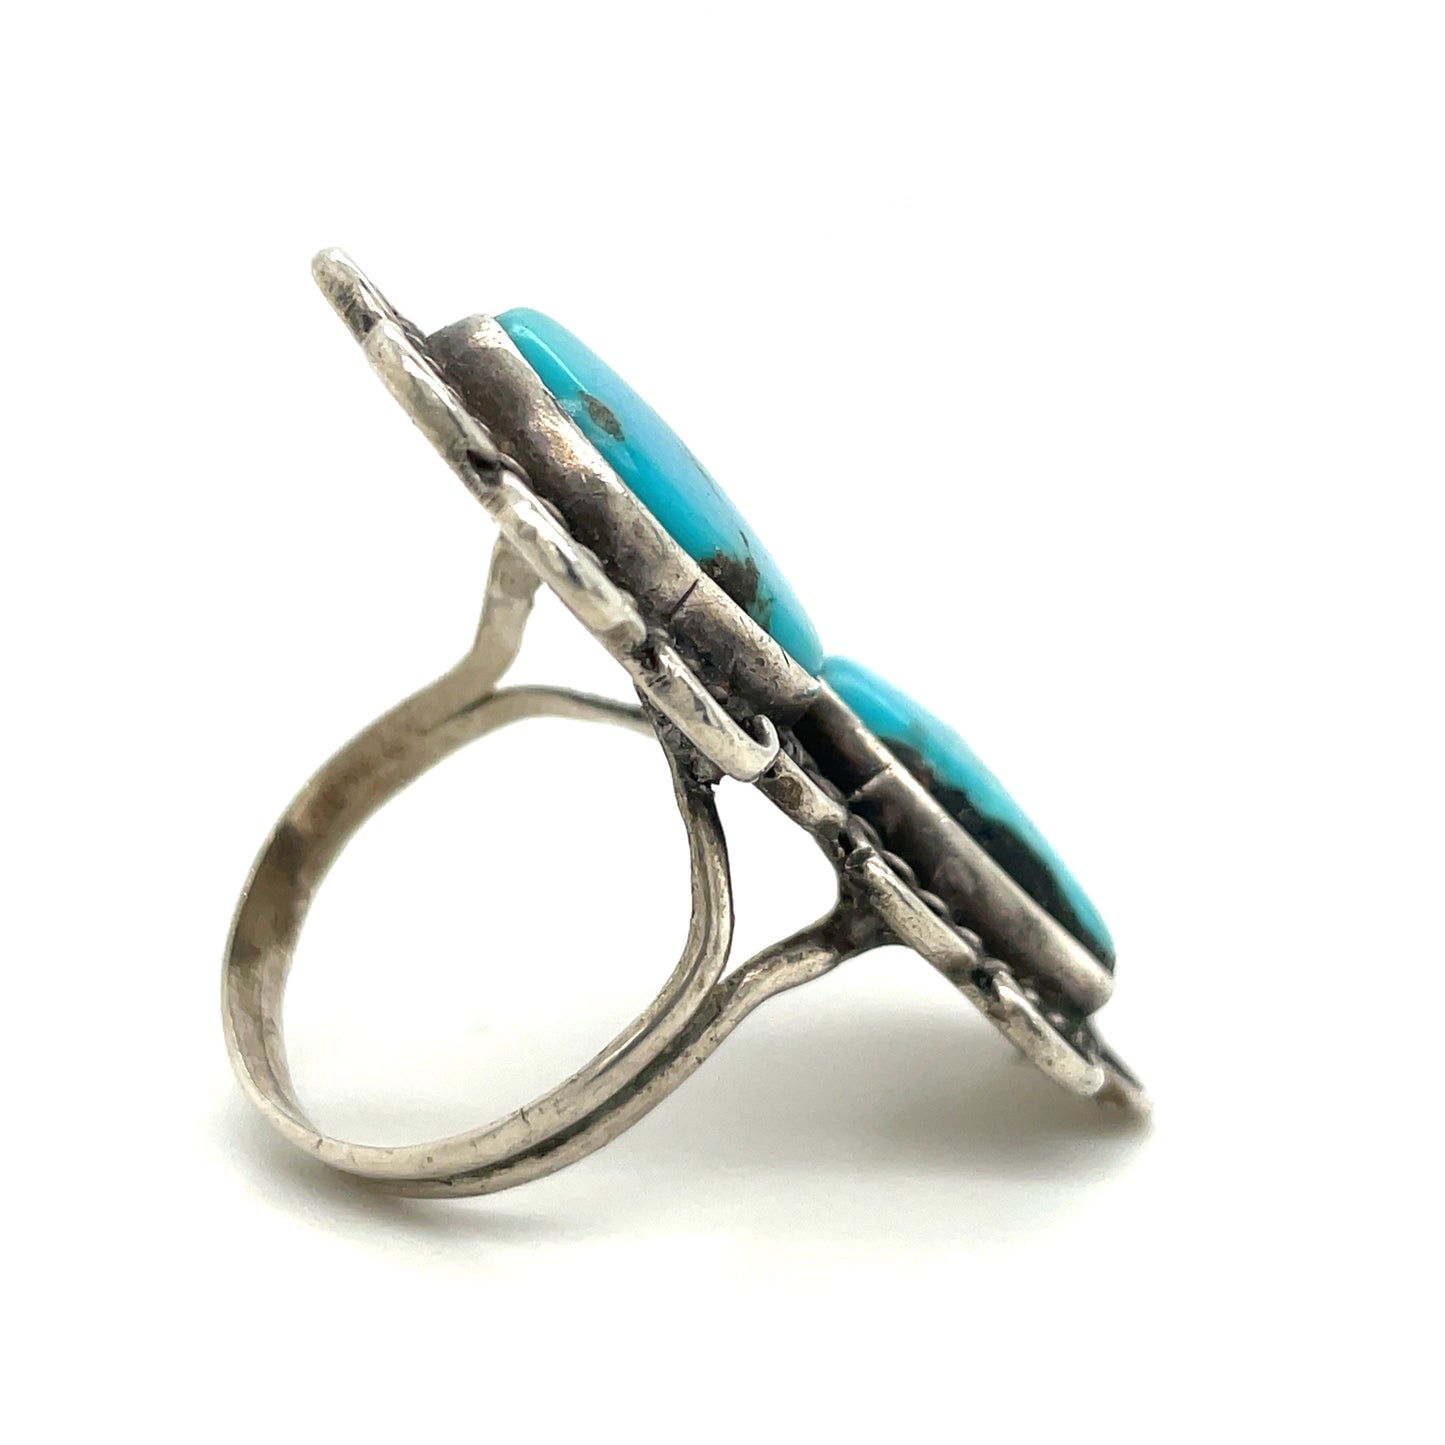 Vintage Southwestern Sterling Silver and Turquoise Ring Size 9.5